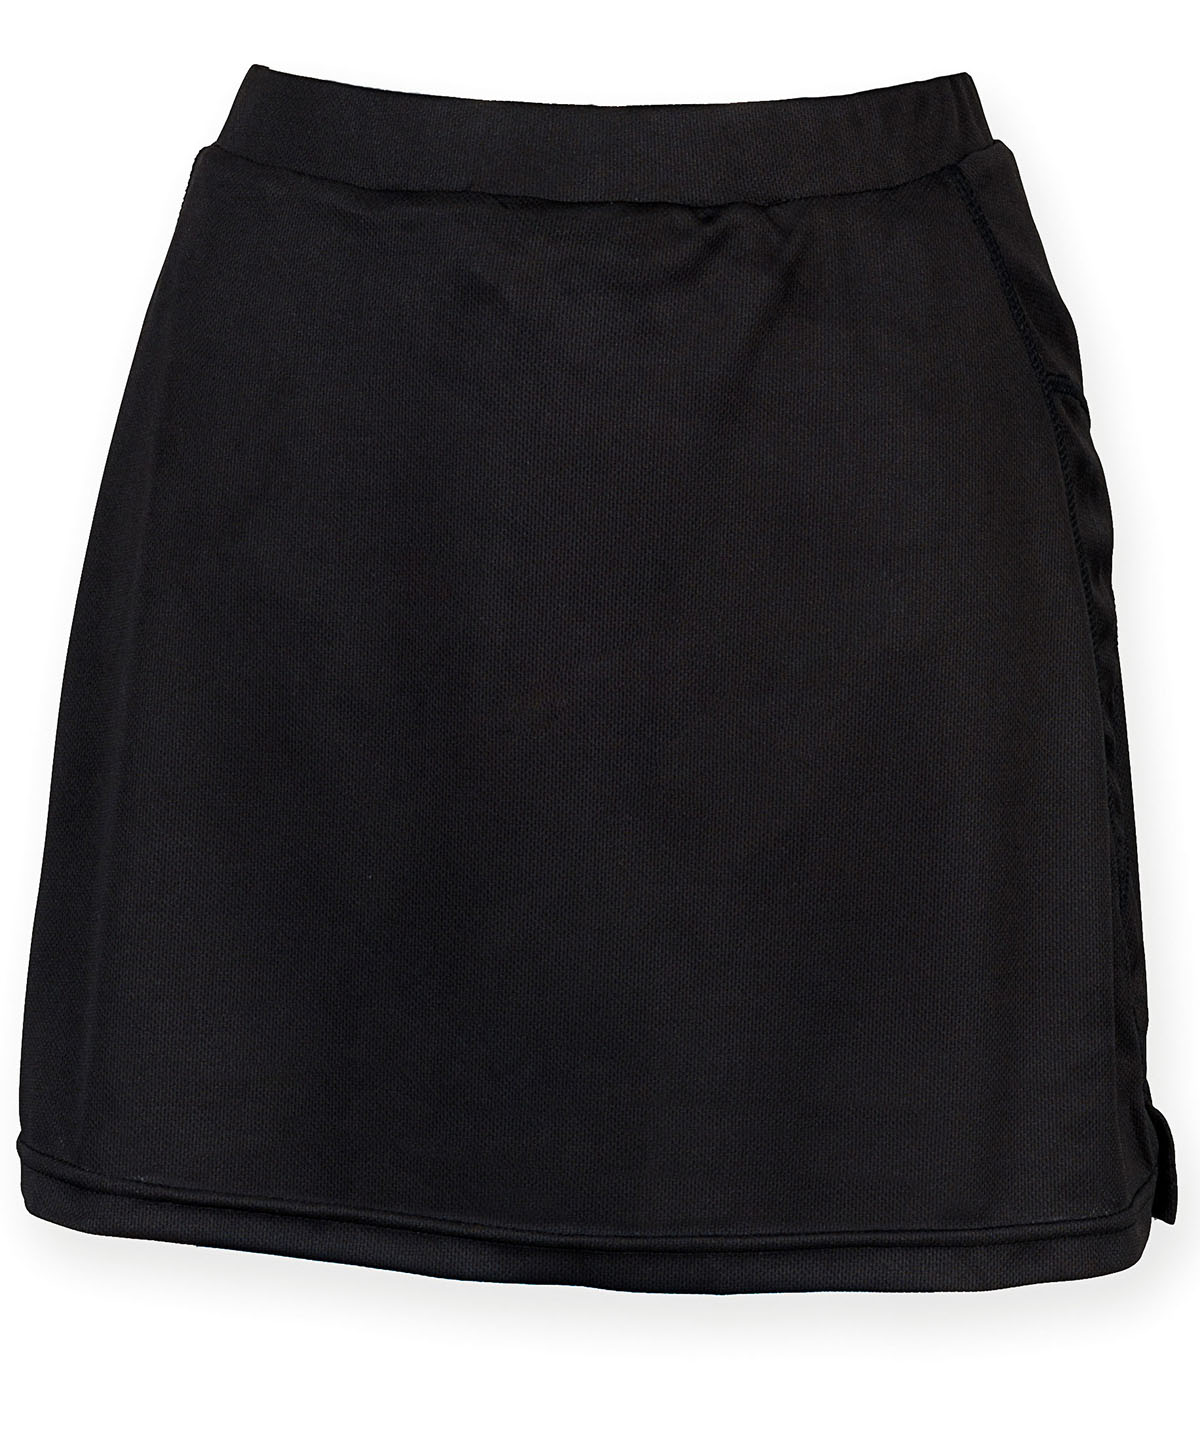 Womens Skort With Wicking Finish Black Size Large